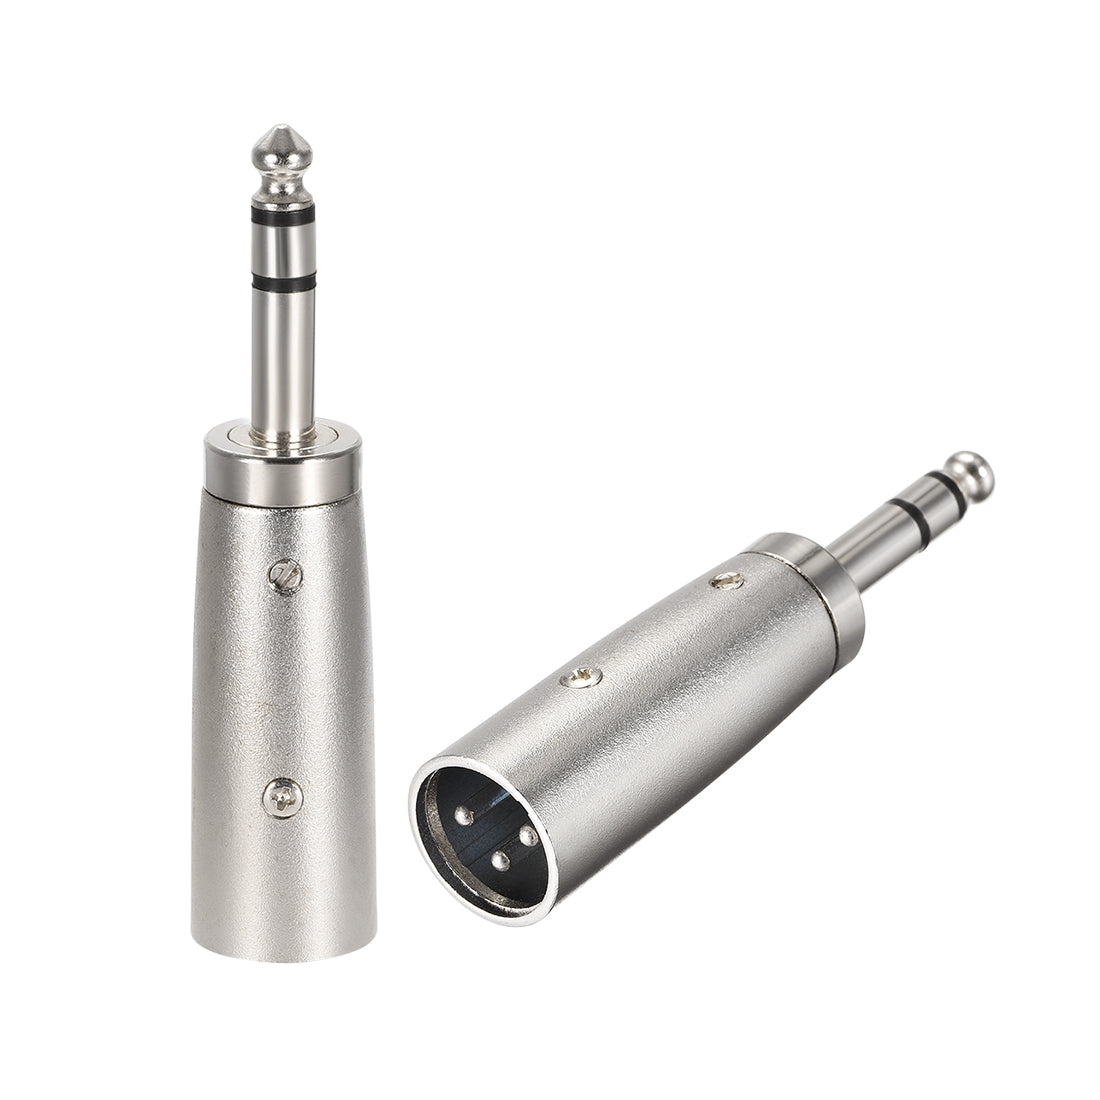 uxcell Uxcell XLR Male to 1/4" Male TRS Adapter,Gender Changer - XLR-M to 6.35mm Balanced Coupler Adapters,Balanced Plug In Audio Connector,Mic Male Plug 2pcs